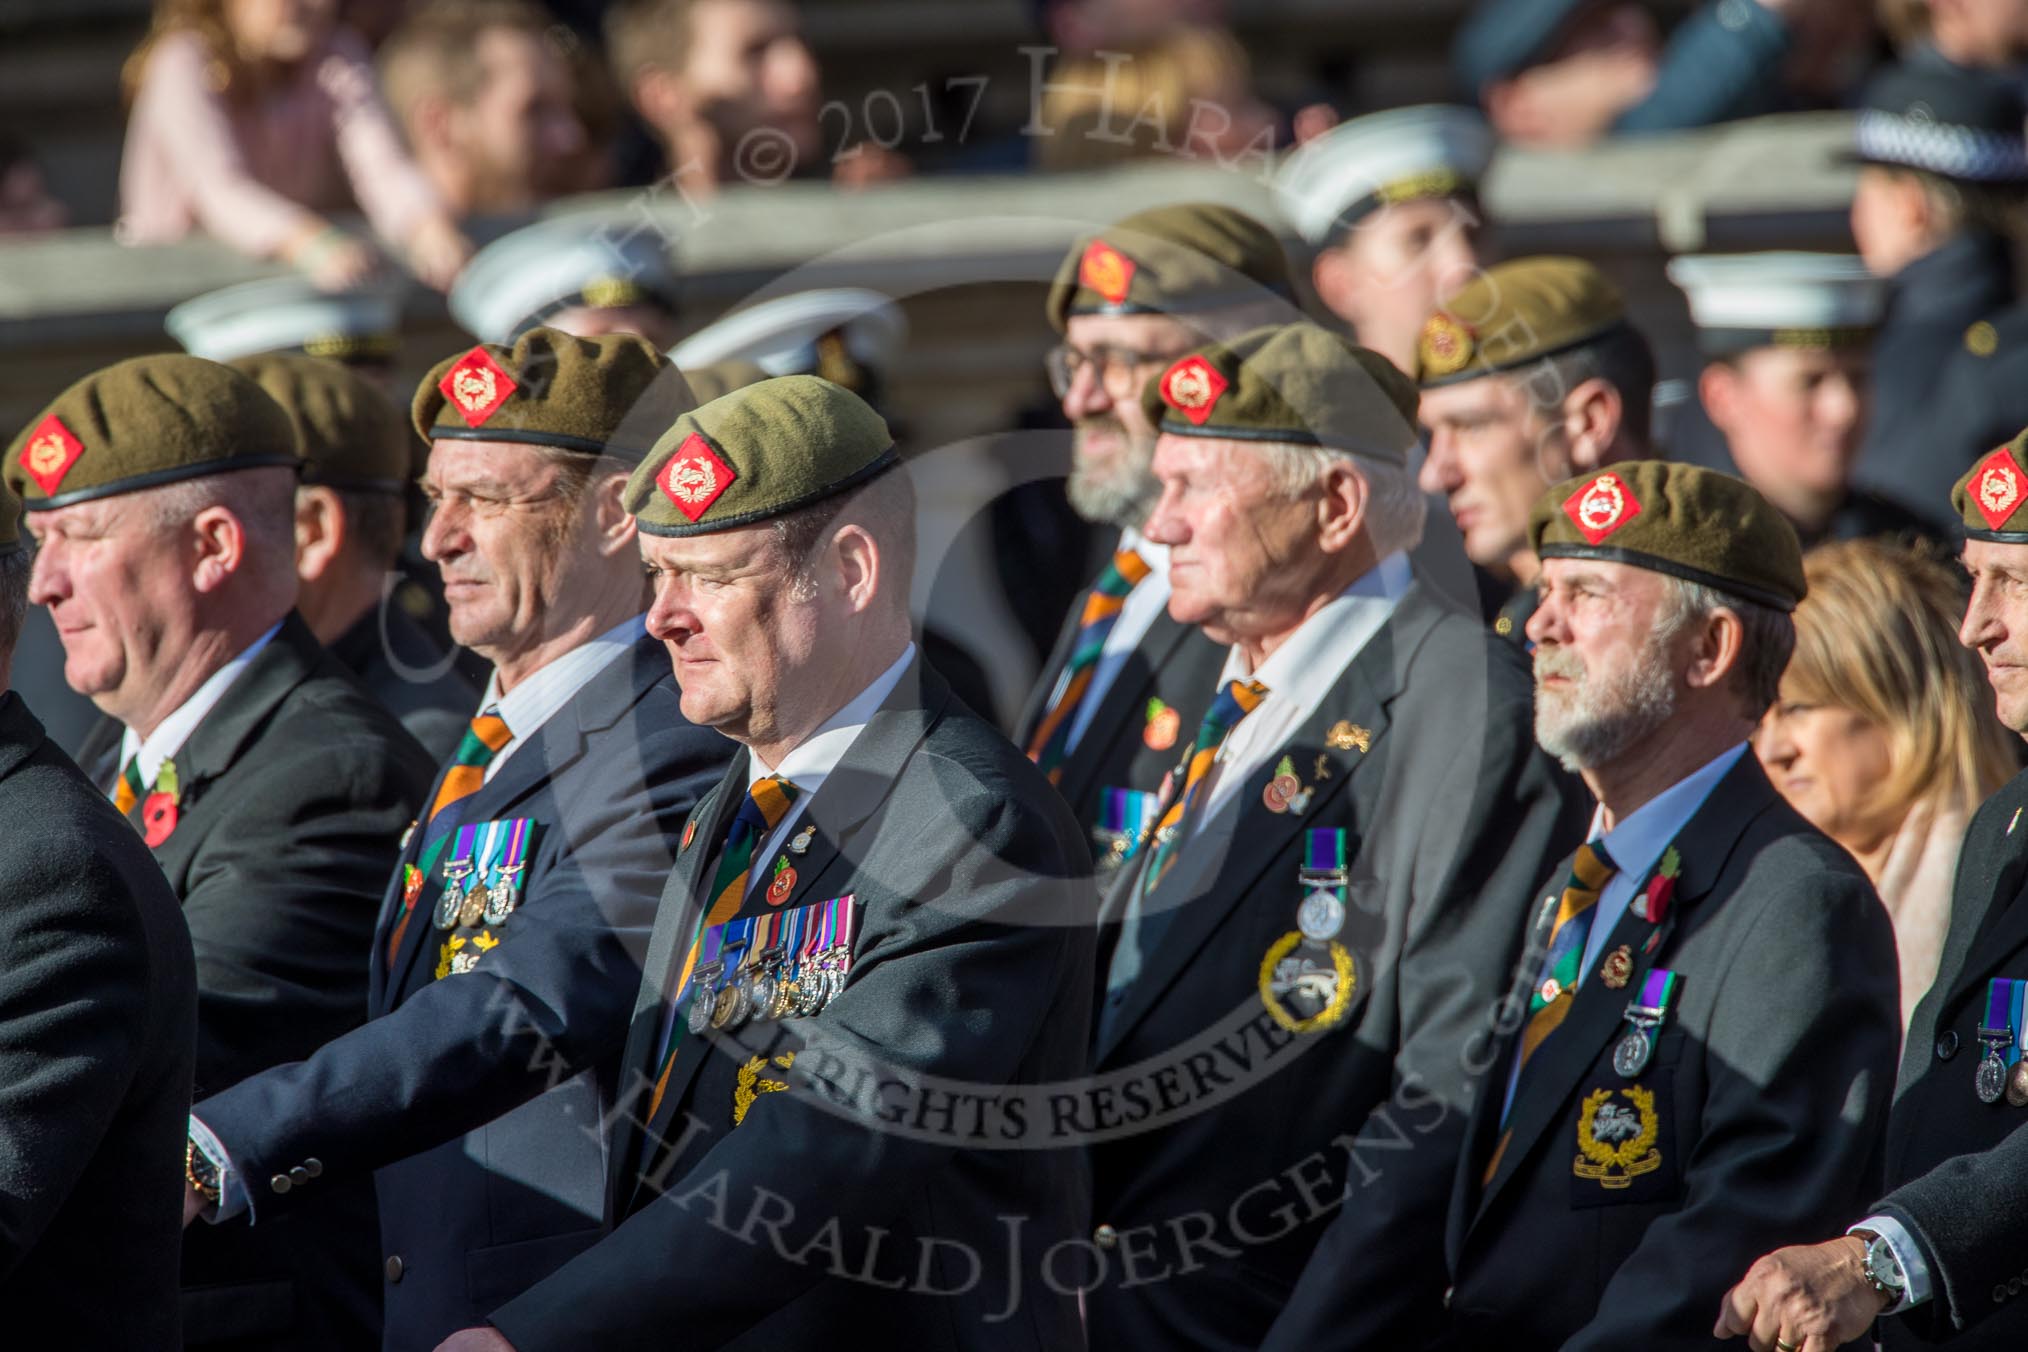 The King's Own Royal Border Regiment (Group A24, 80 members) during the Royal British Legion March Past on Remembrance Sunday at the Cenotaph, Whitehall, Westminster, London, 11 November 2018, 12:00.